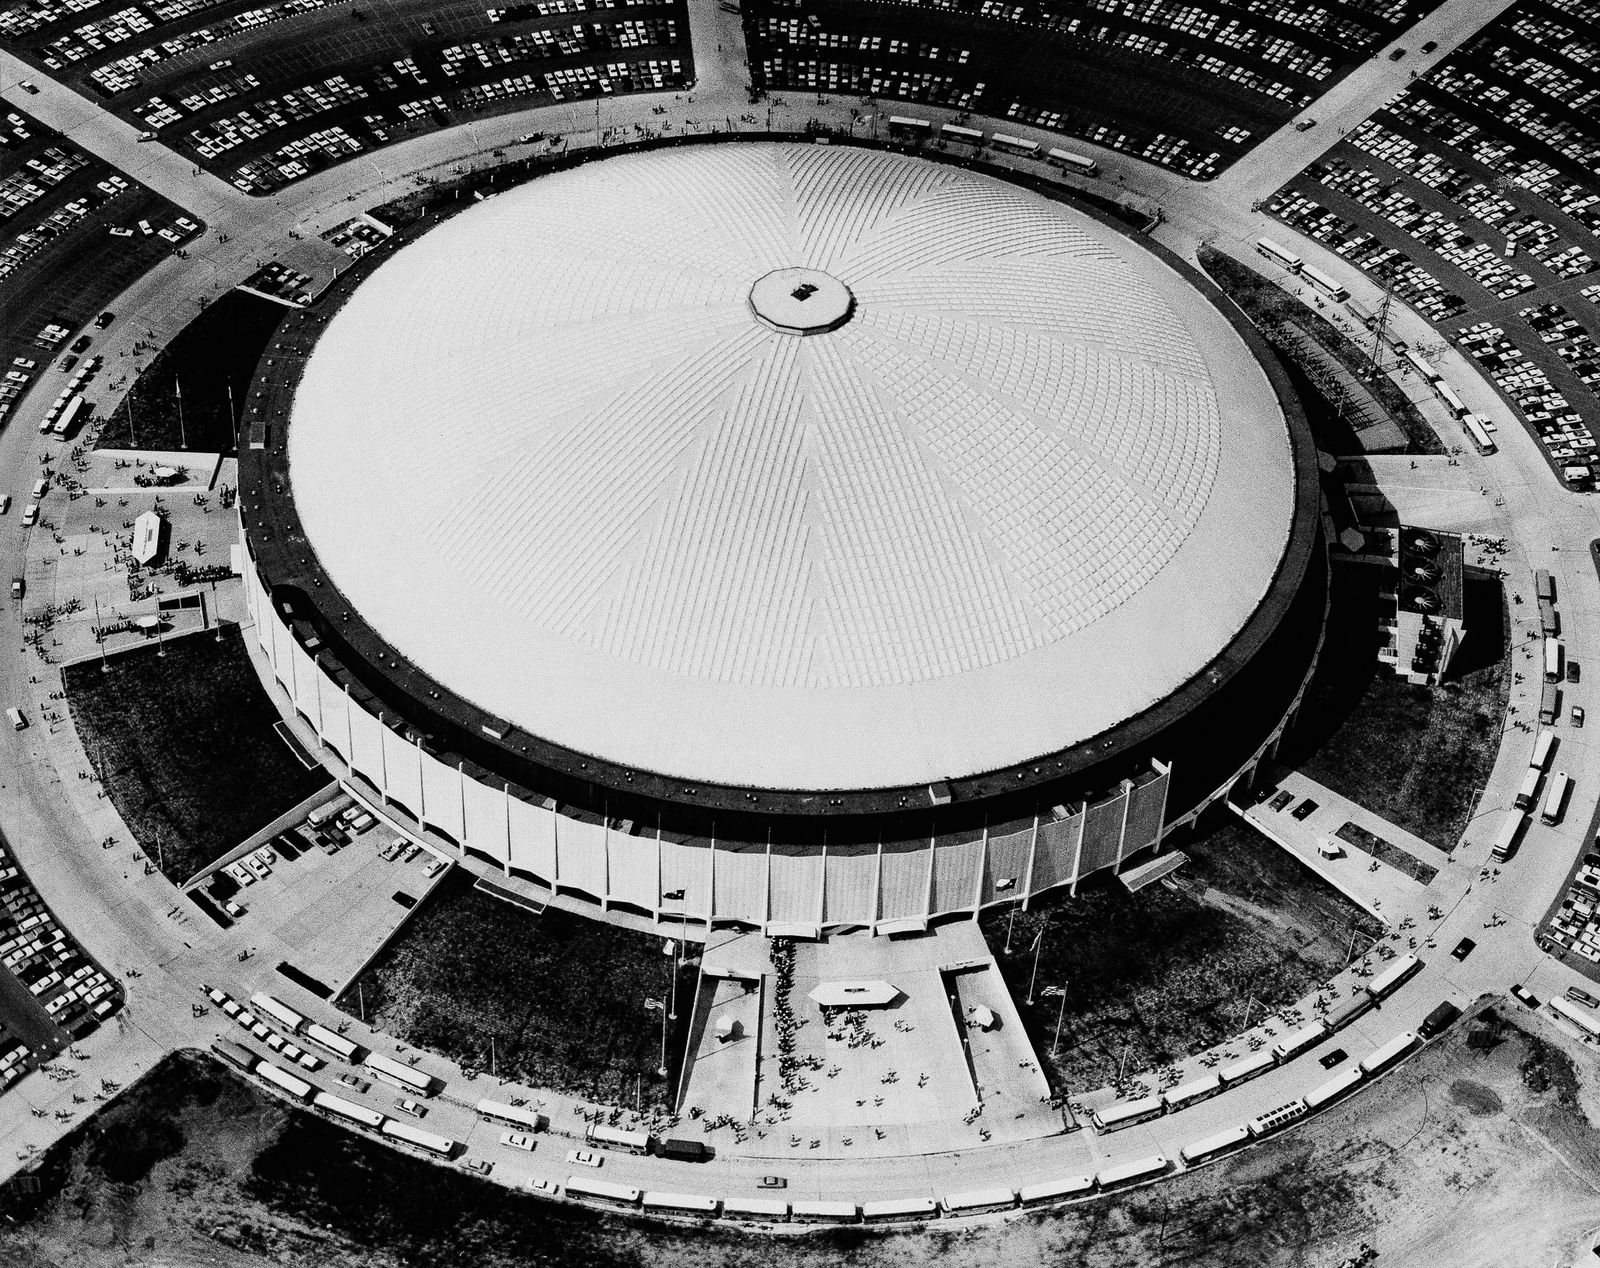 What was the eighth wonder of the world in 1965?